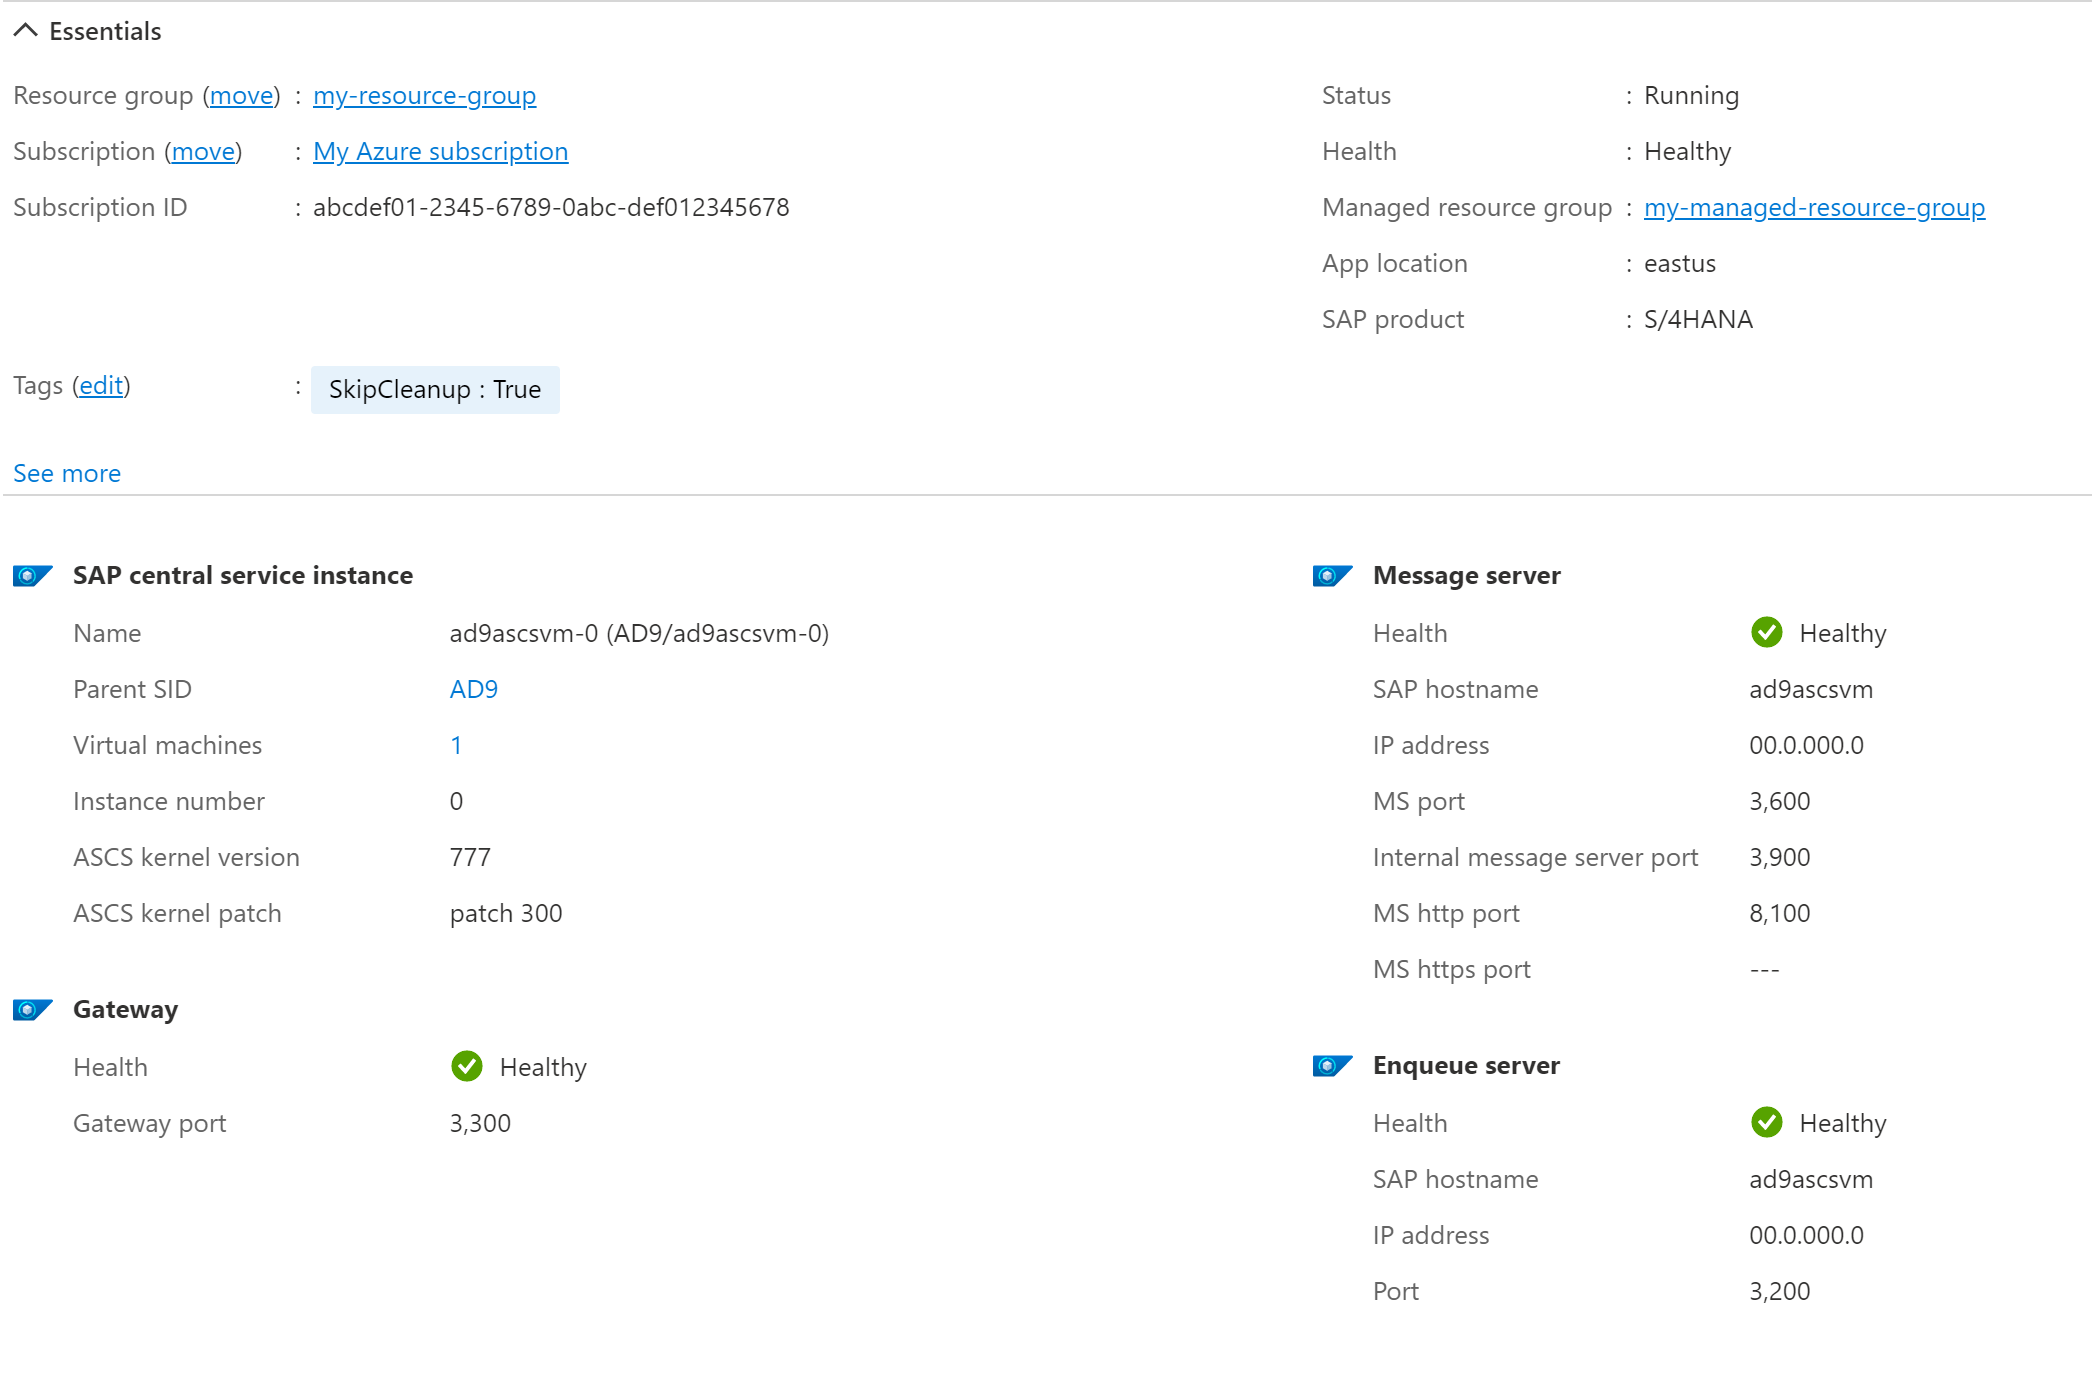 Screenshot of an ASCS instance in the Azure portal, showing health and status information for the VM.